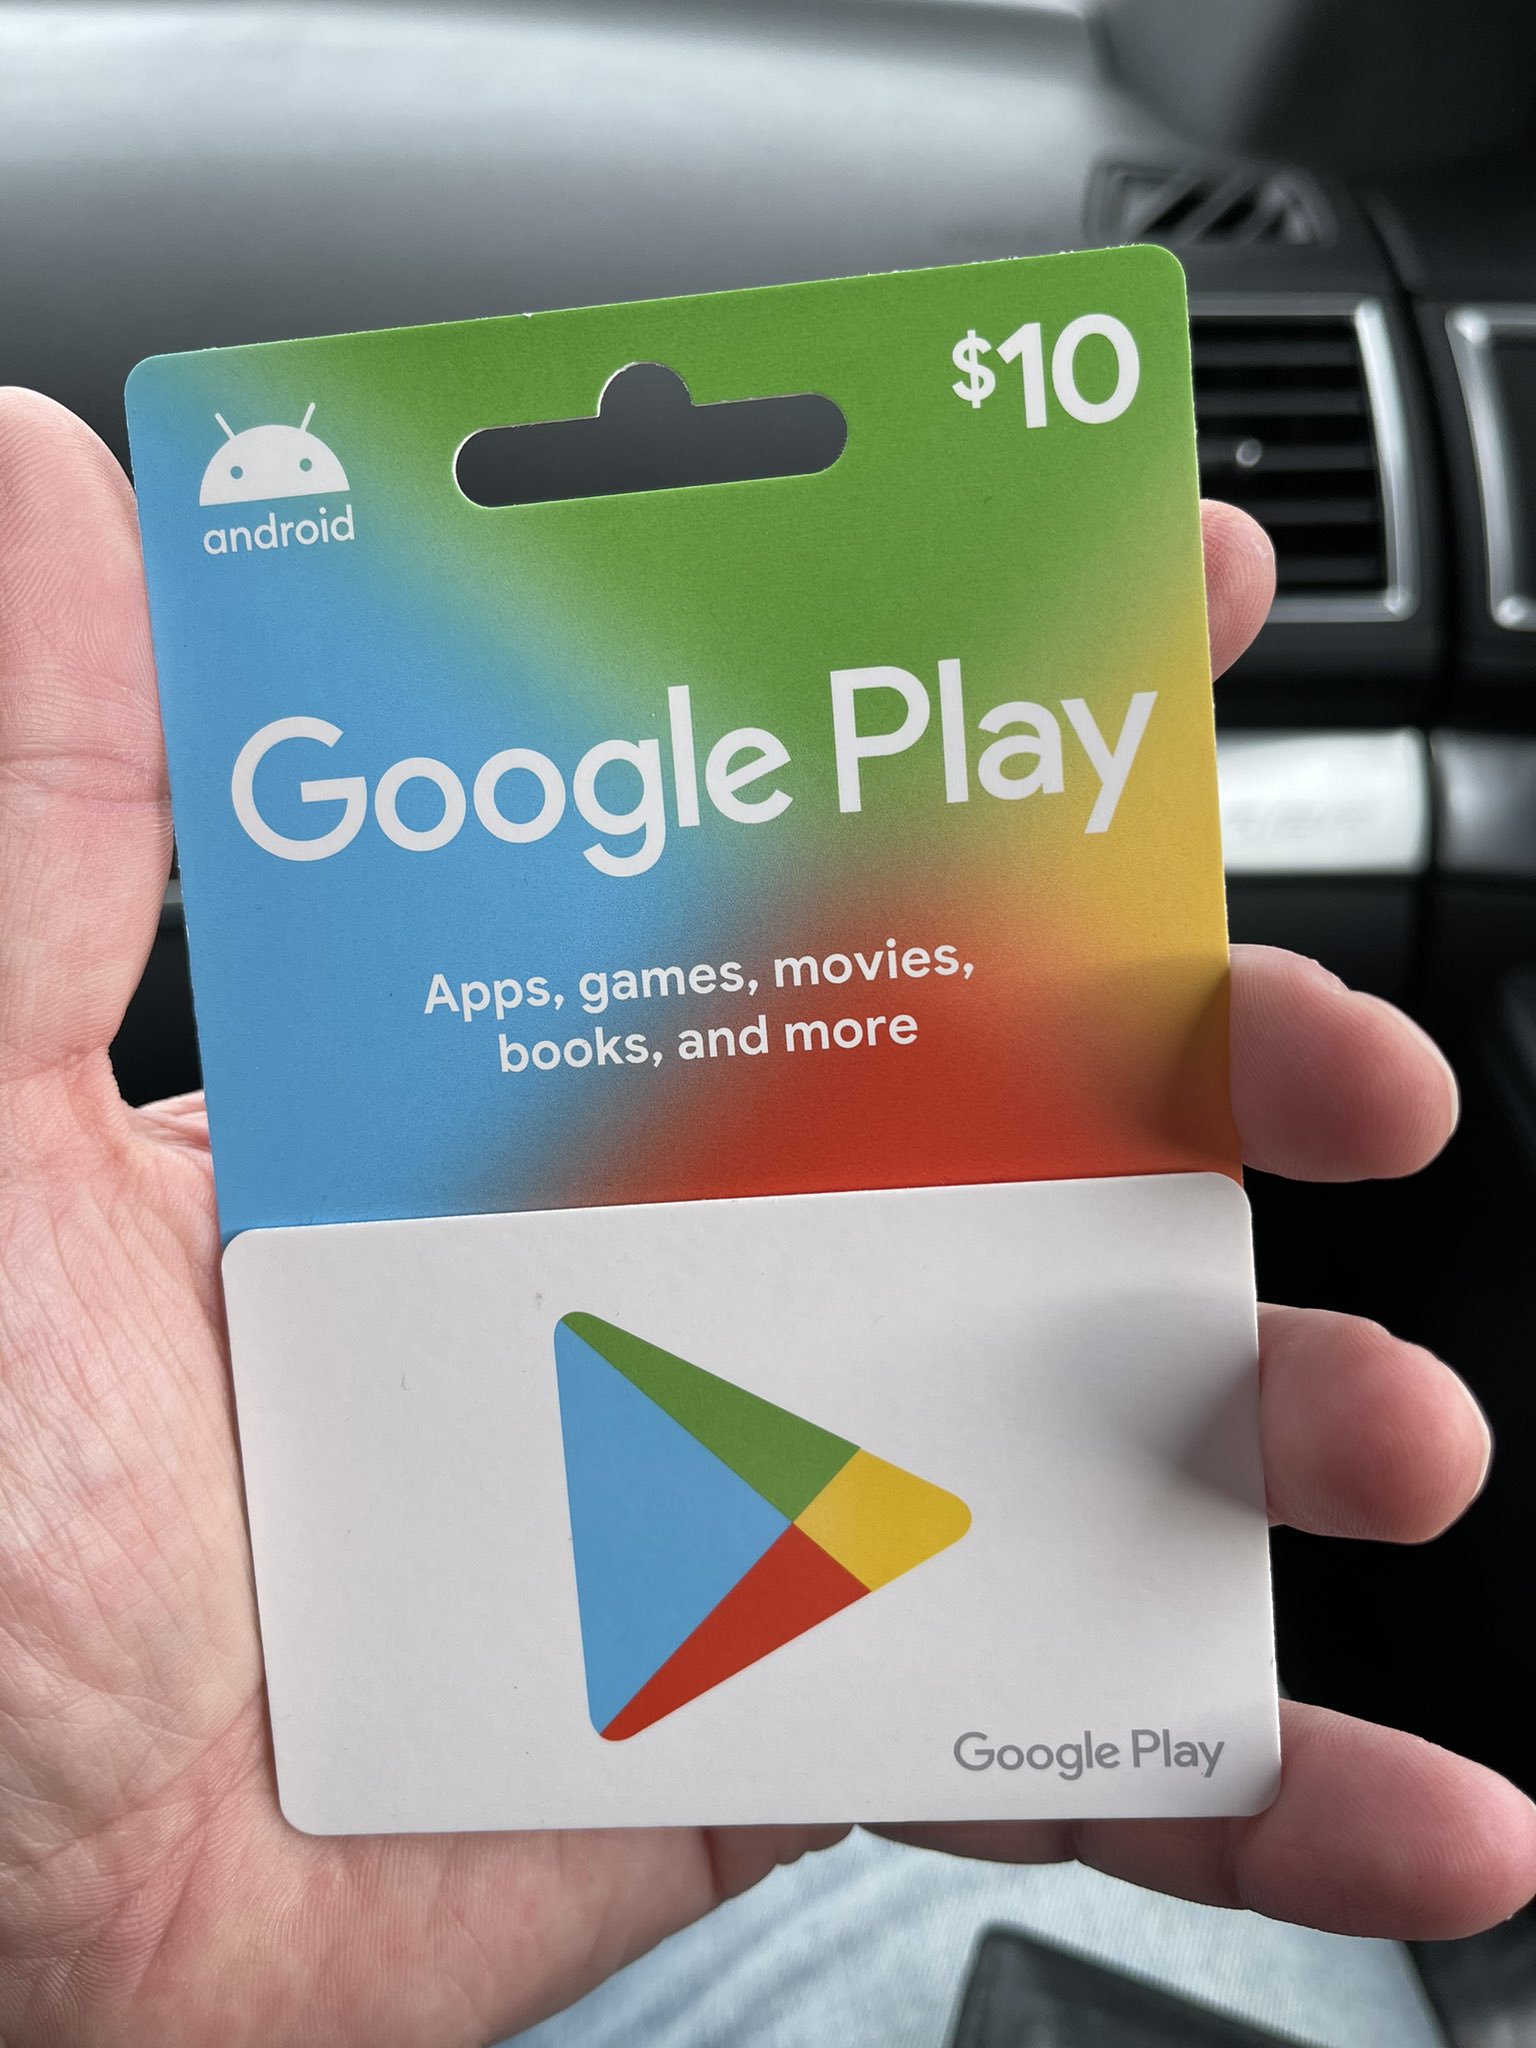  Google Play gift card - give the gift of games, apps